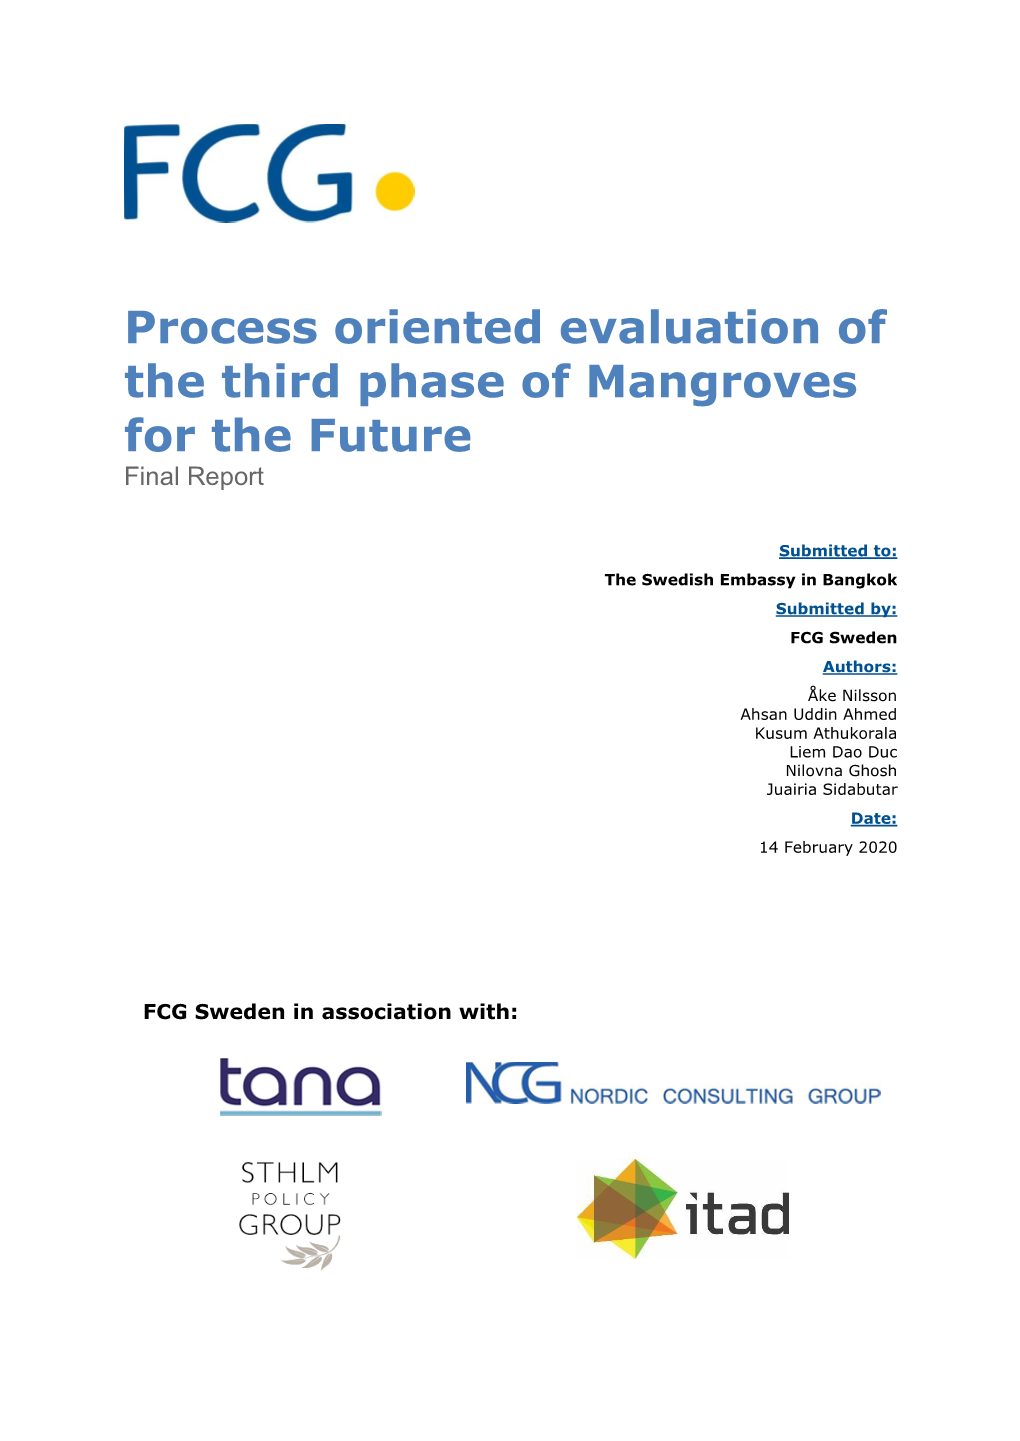 Mangroves for the Future Final Report